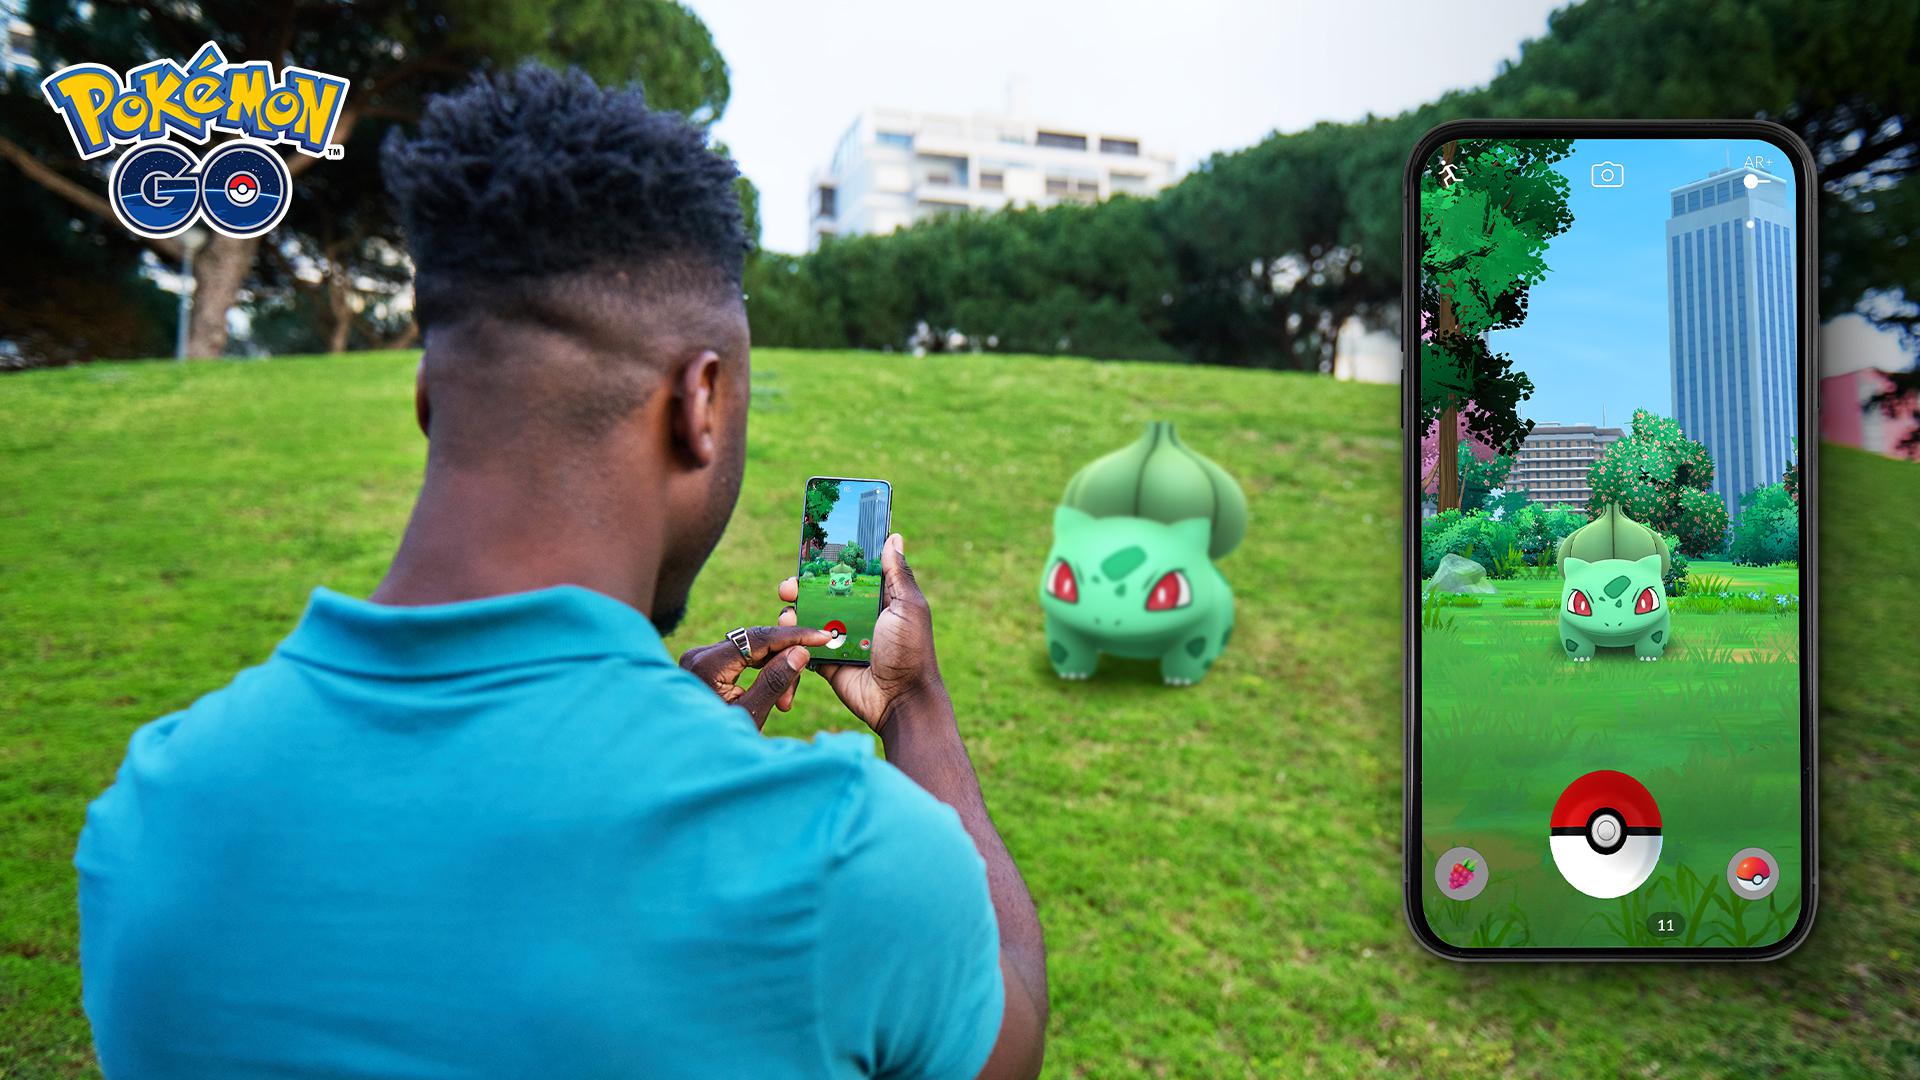 Pokémon GO’s Latest Updates: Avatar Customization and Immersive Graphics Take the Game to New Heights